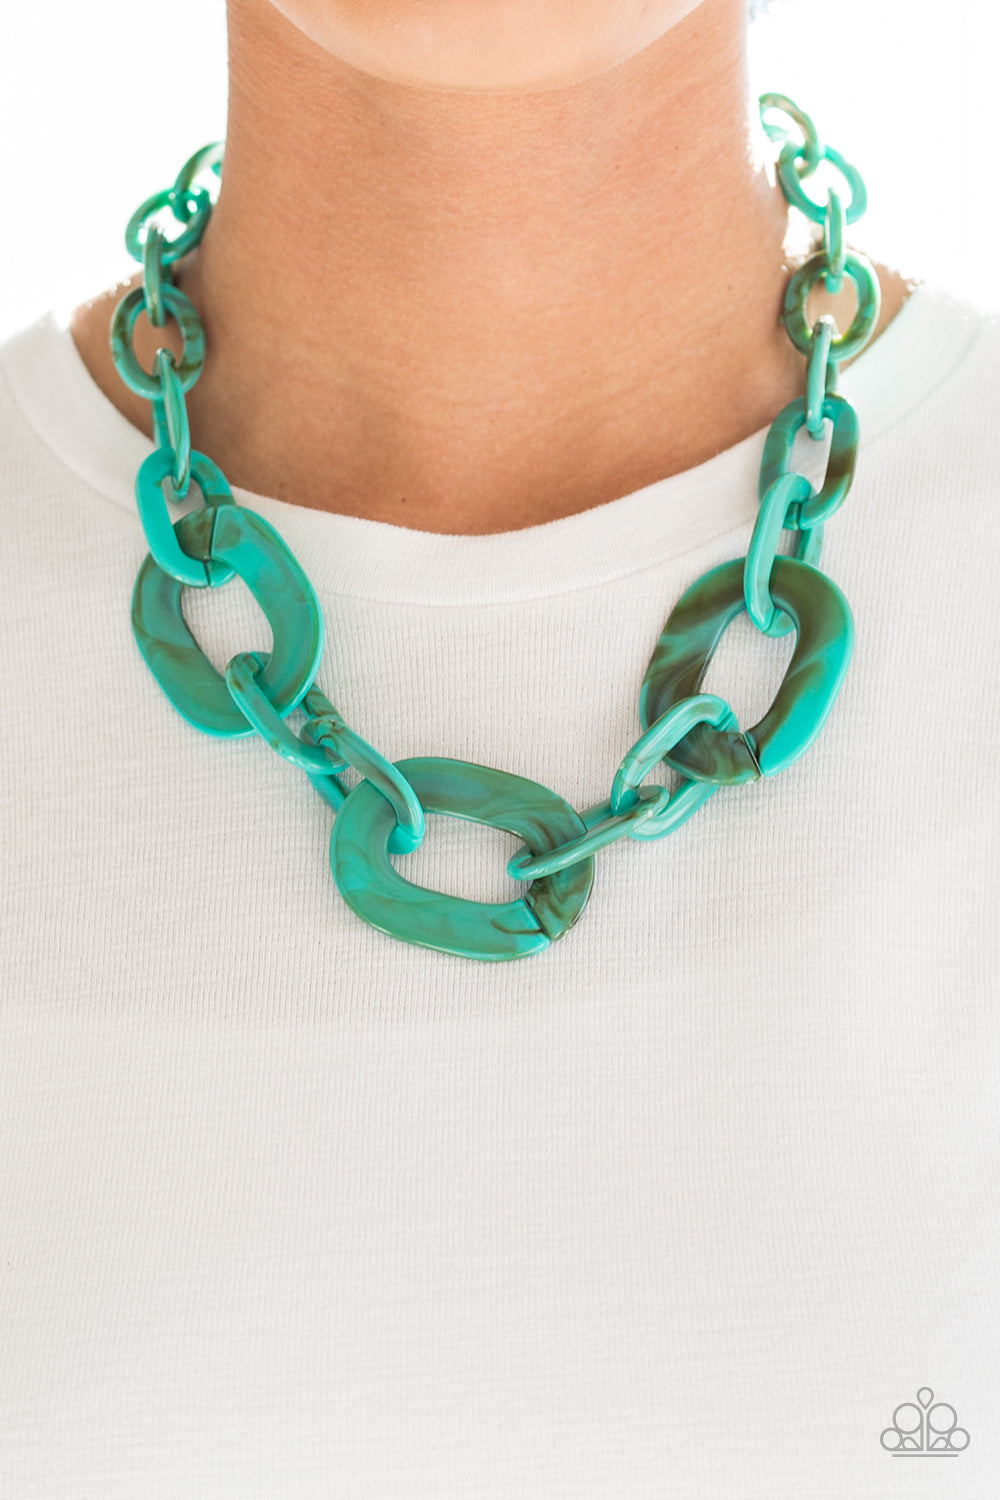 Paparazzi Accessories All in-VINCIBLE - Blue Necklaces brushed in a faux-marble finish, bold turquoise links connect below the collar for a statement making look. Features an adjustable clasp closure.  Sold as one individual necklace. Includes one pair of matching earrings.